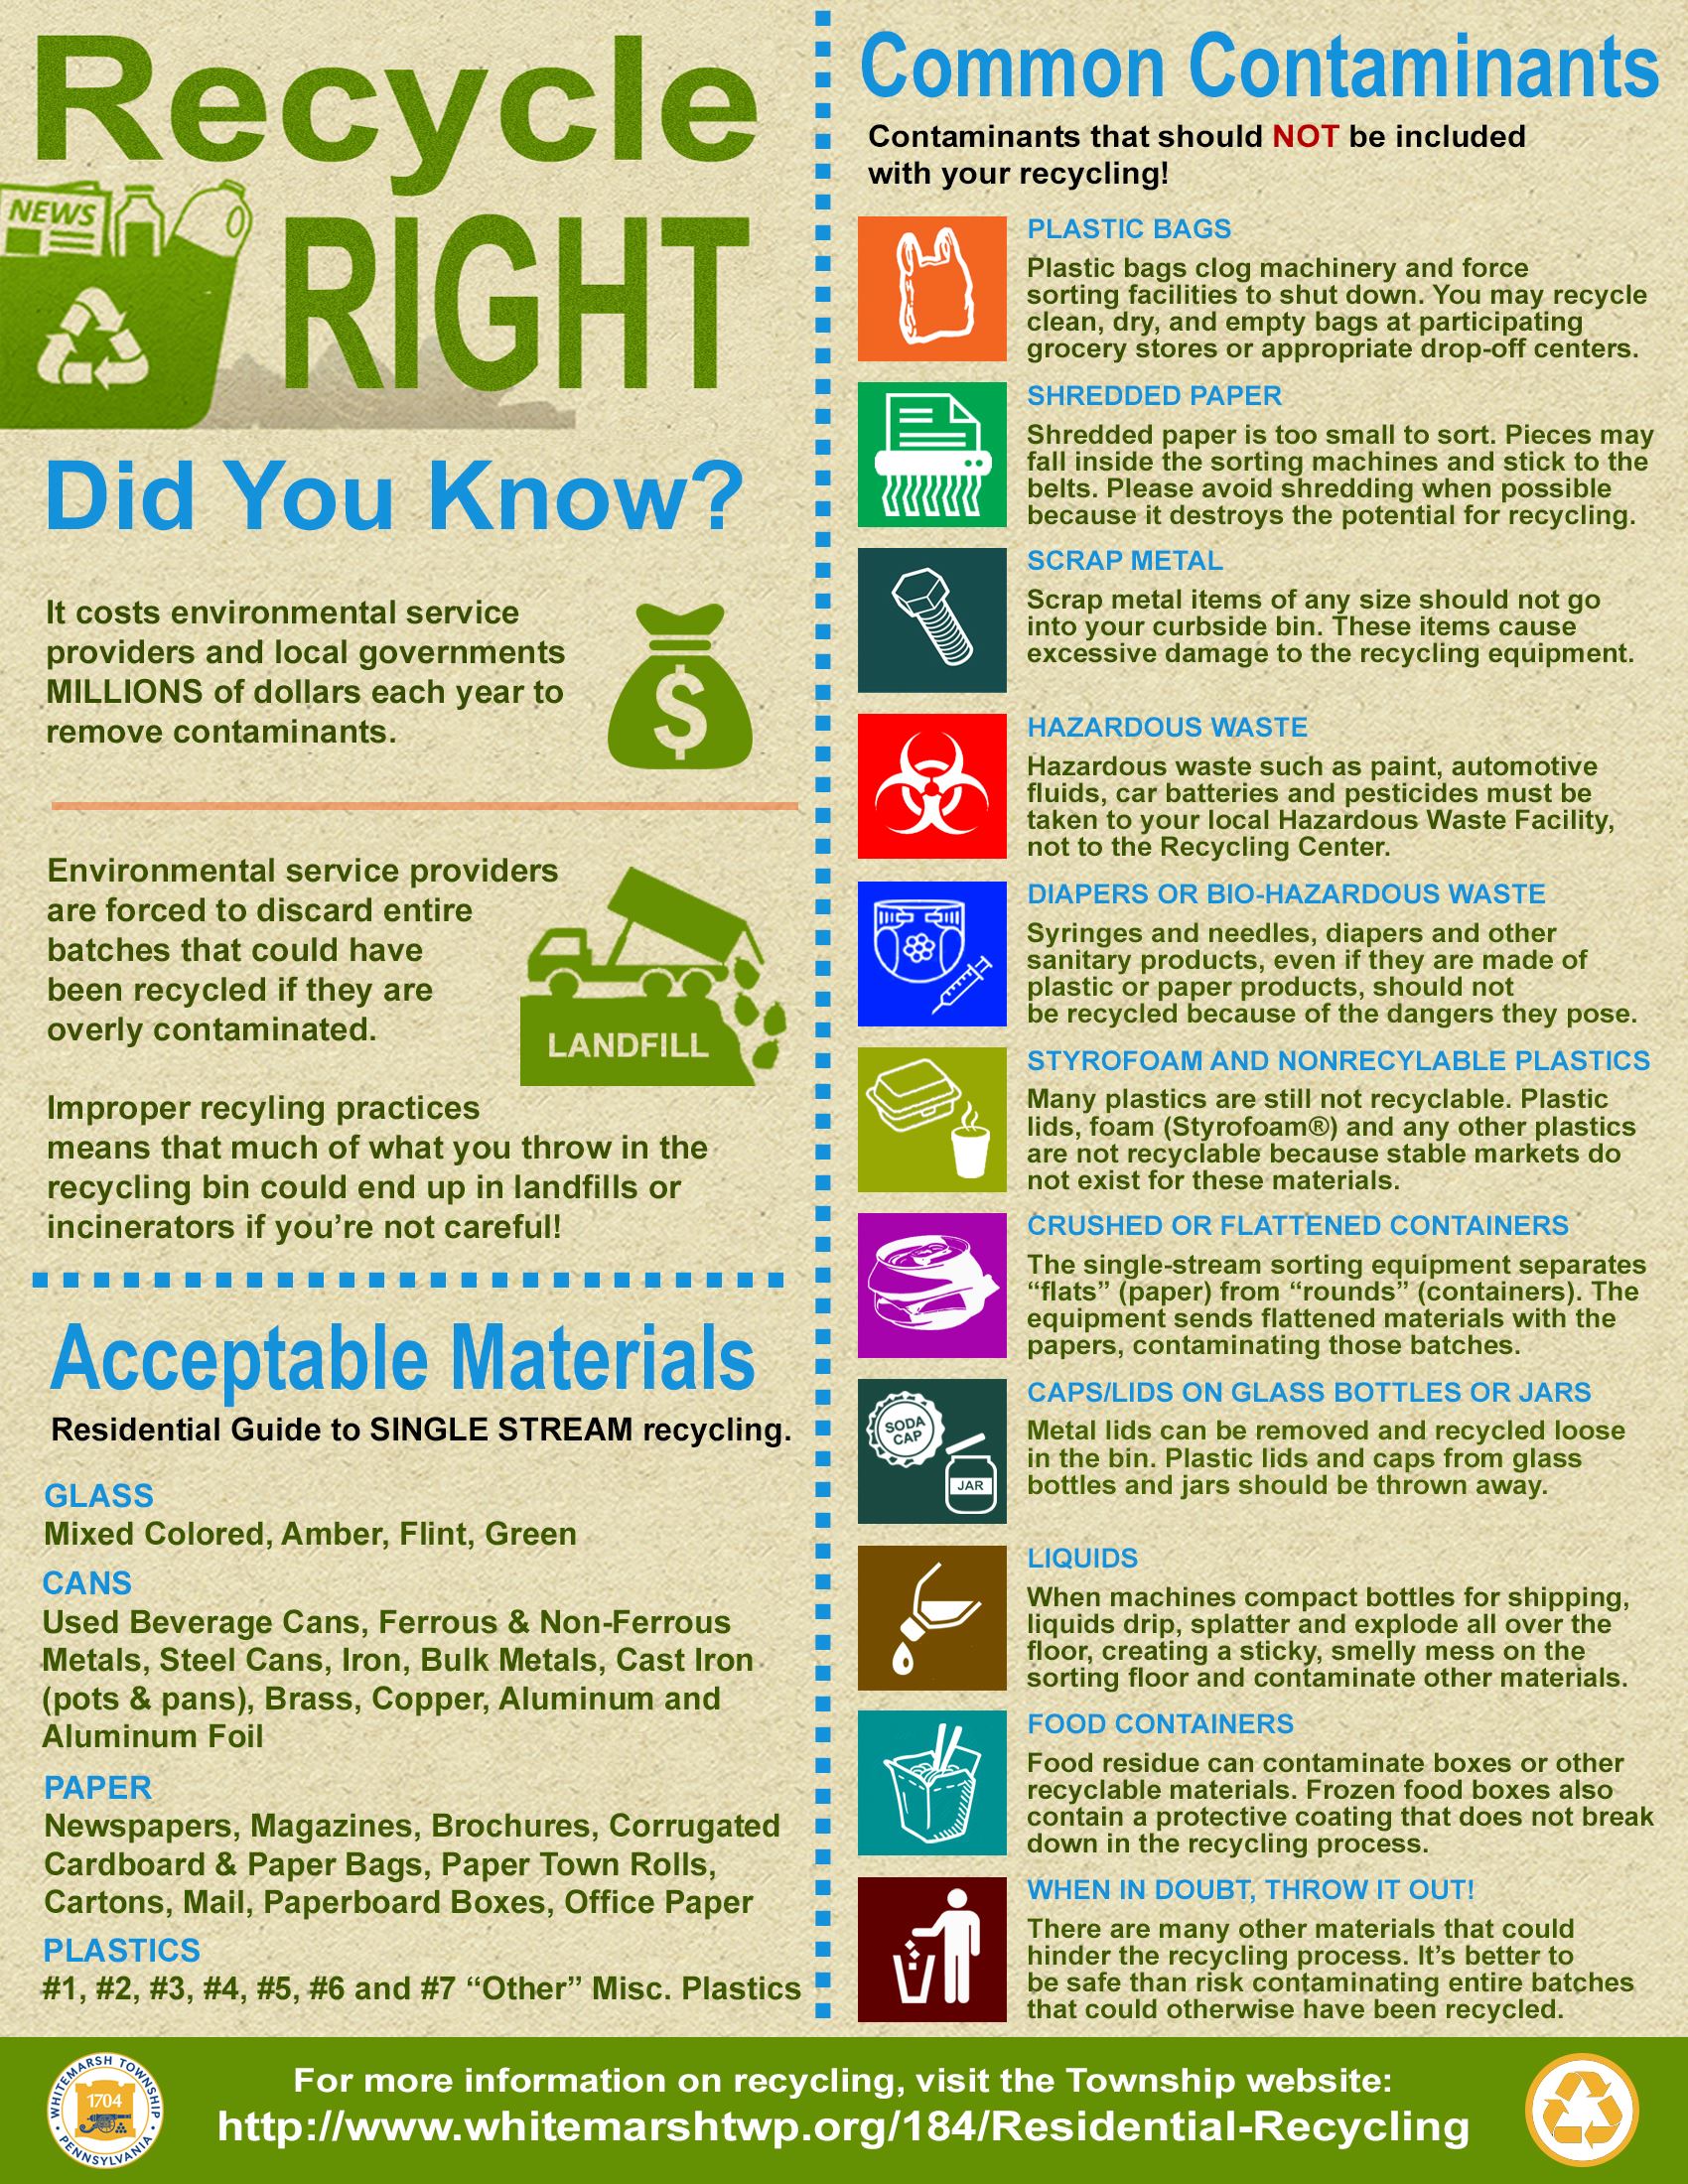 recycling facts - Google Search | Recycling facts, Recycling, Recycling lessons